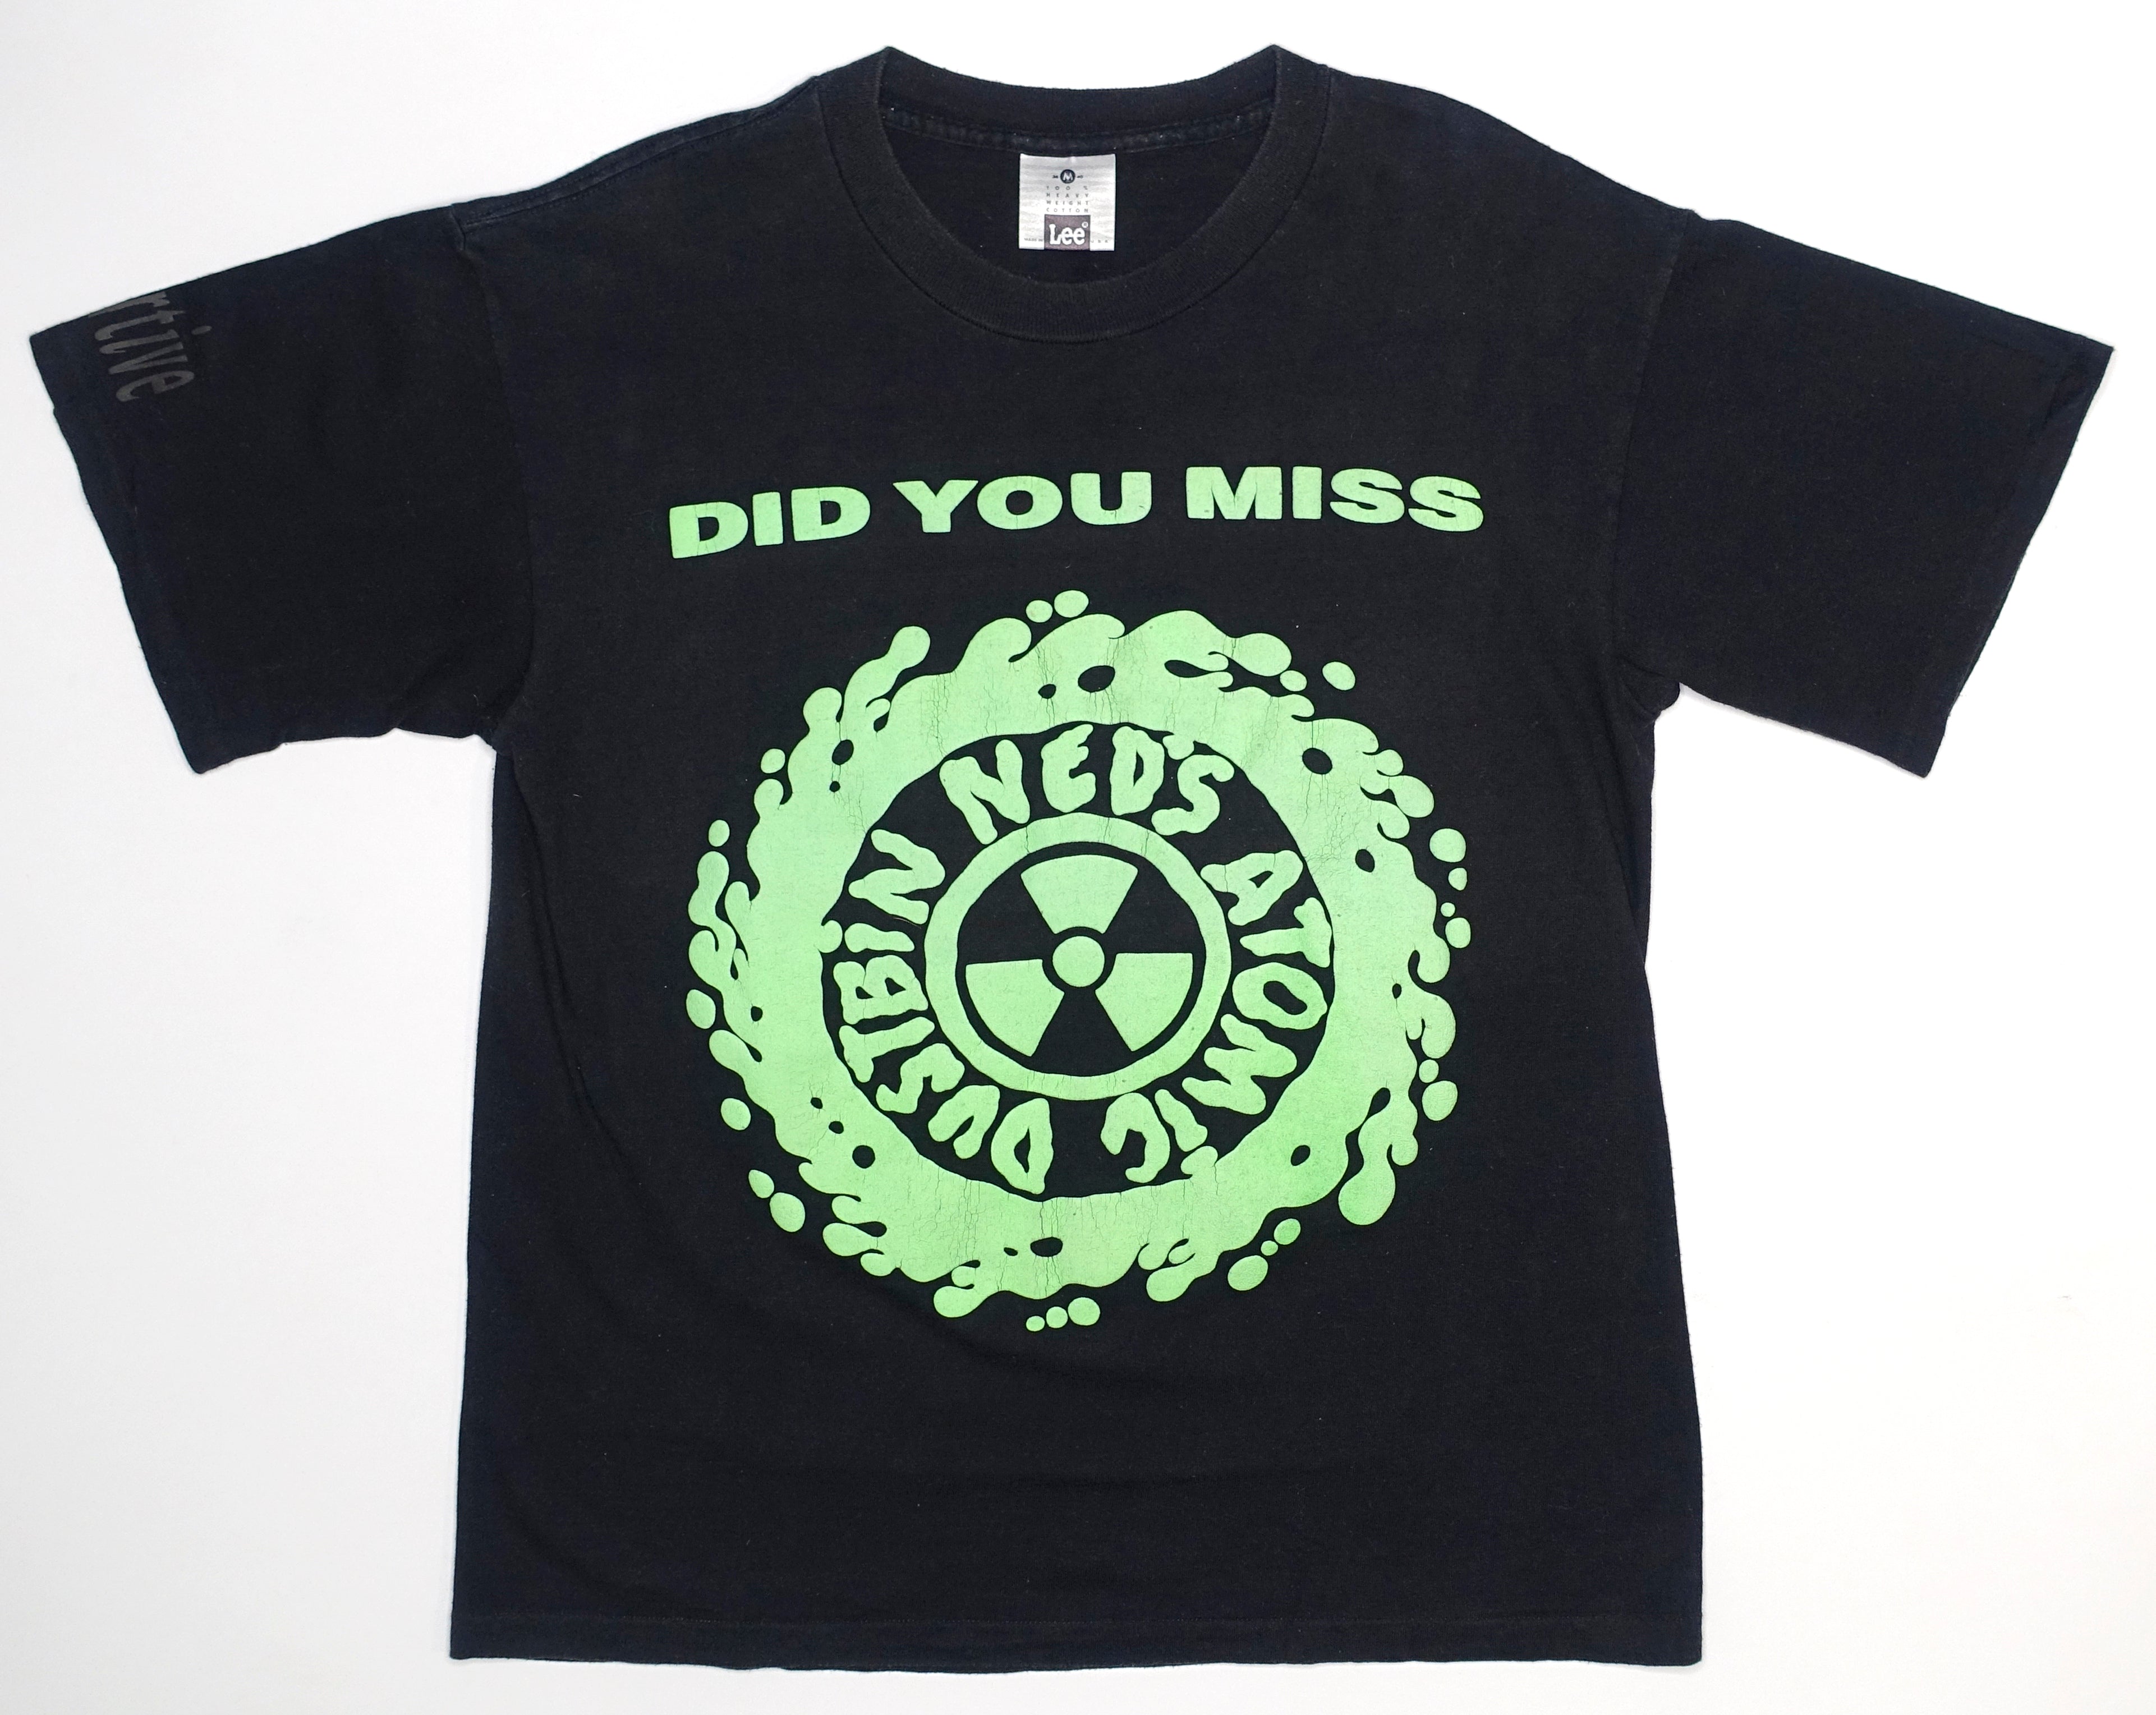 Ned's Atomic Dustbin - Did You Miss Ned's? 1992 Tour Shirt Size Large / Medium